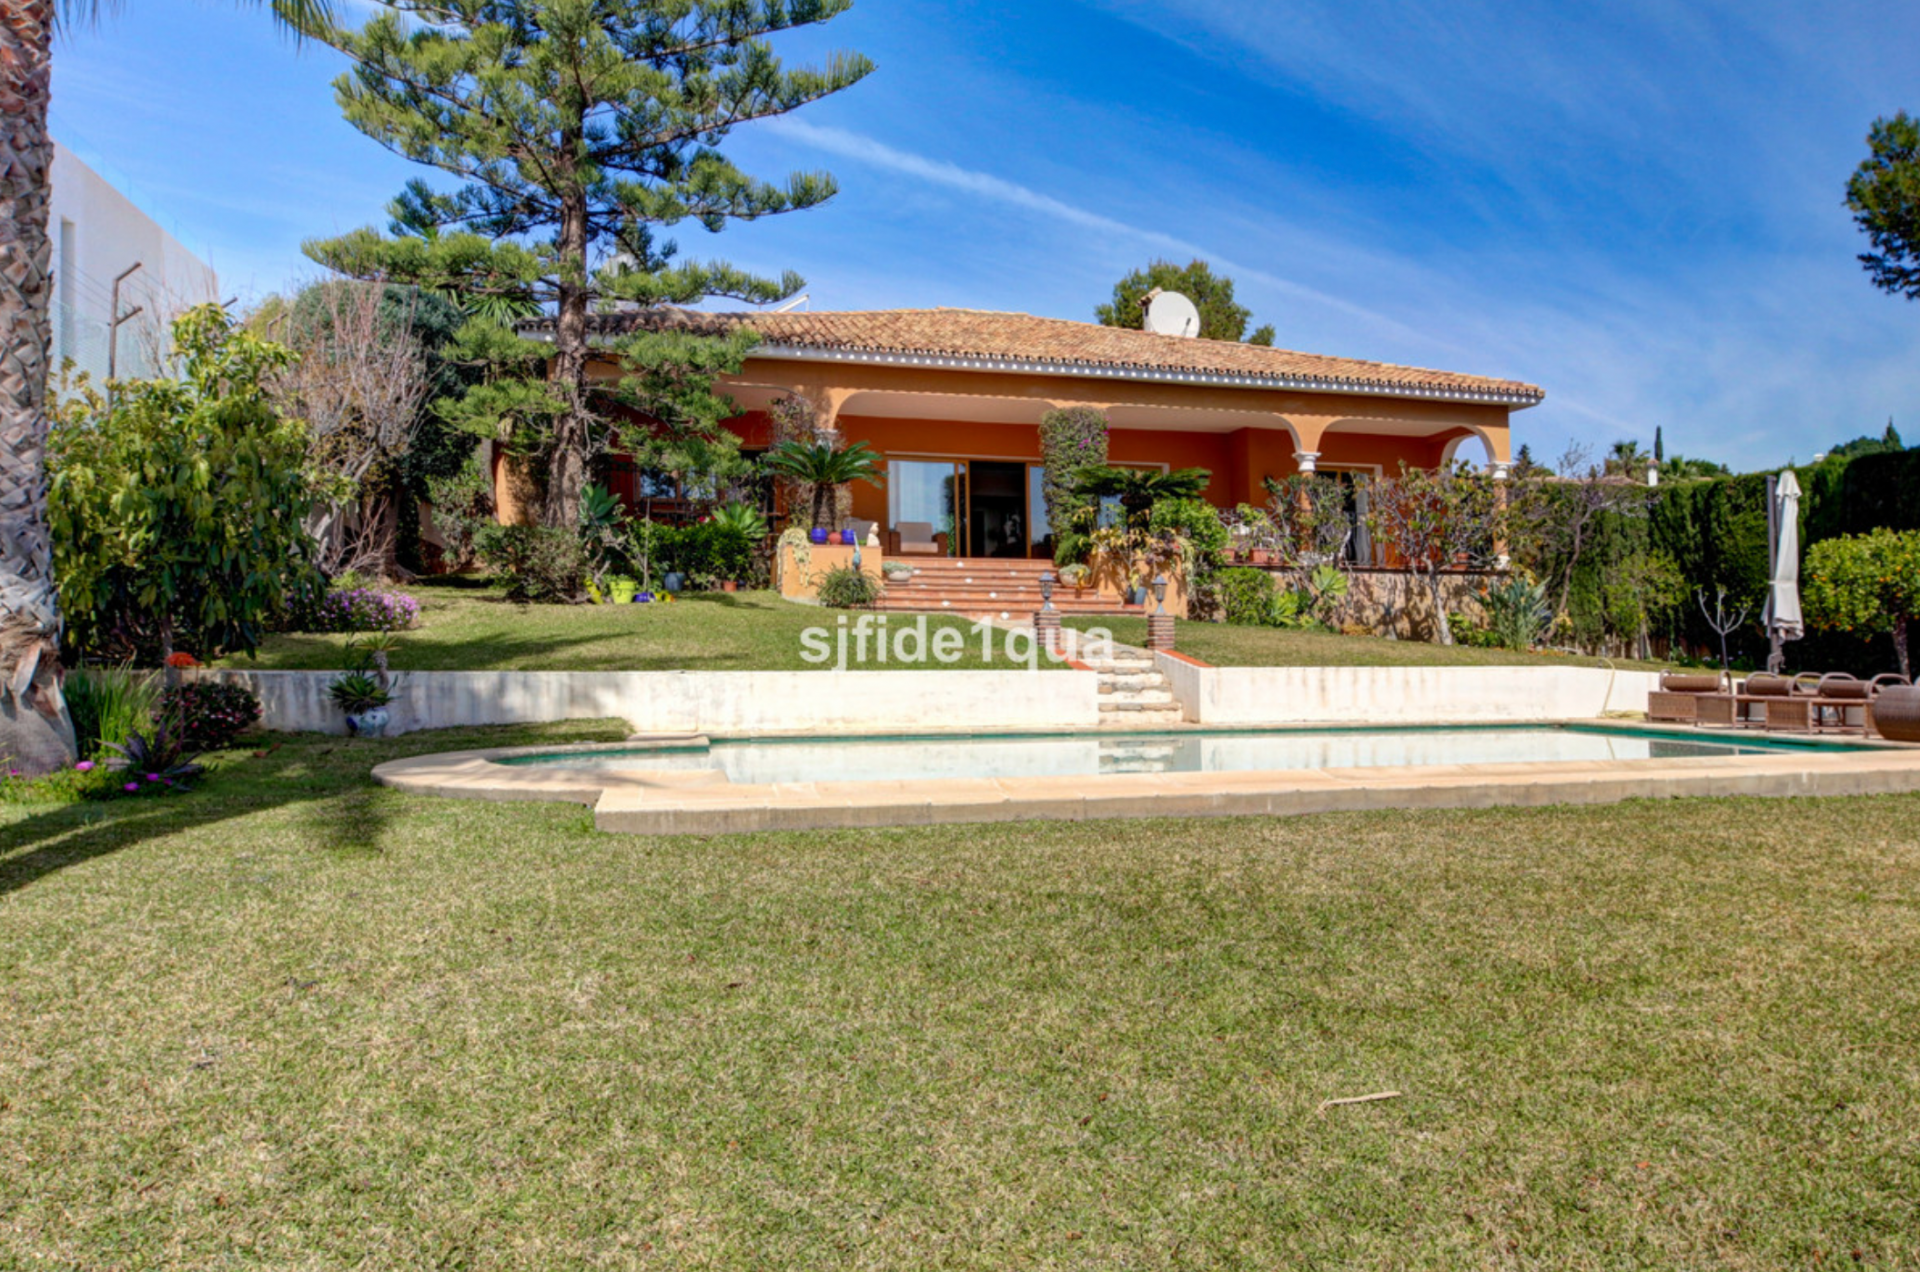 Well located villa with magnificent views of the sea and mountains from an elevated position in Paraiso Alto